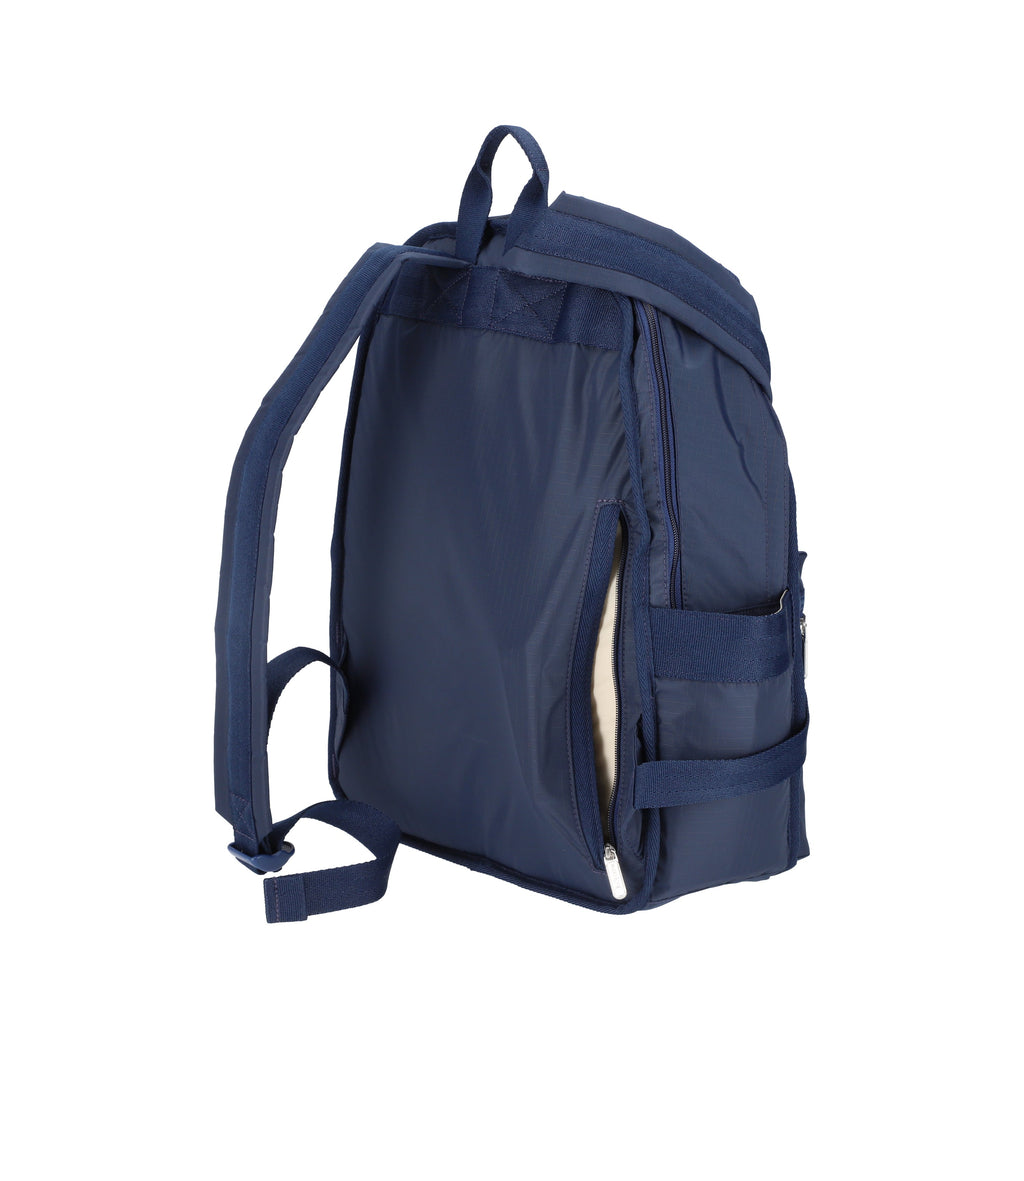 Route Backpack - 23818453778480